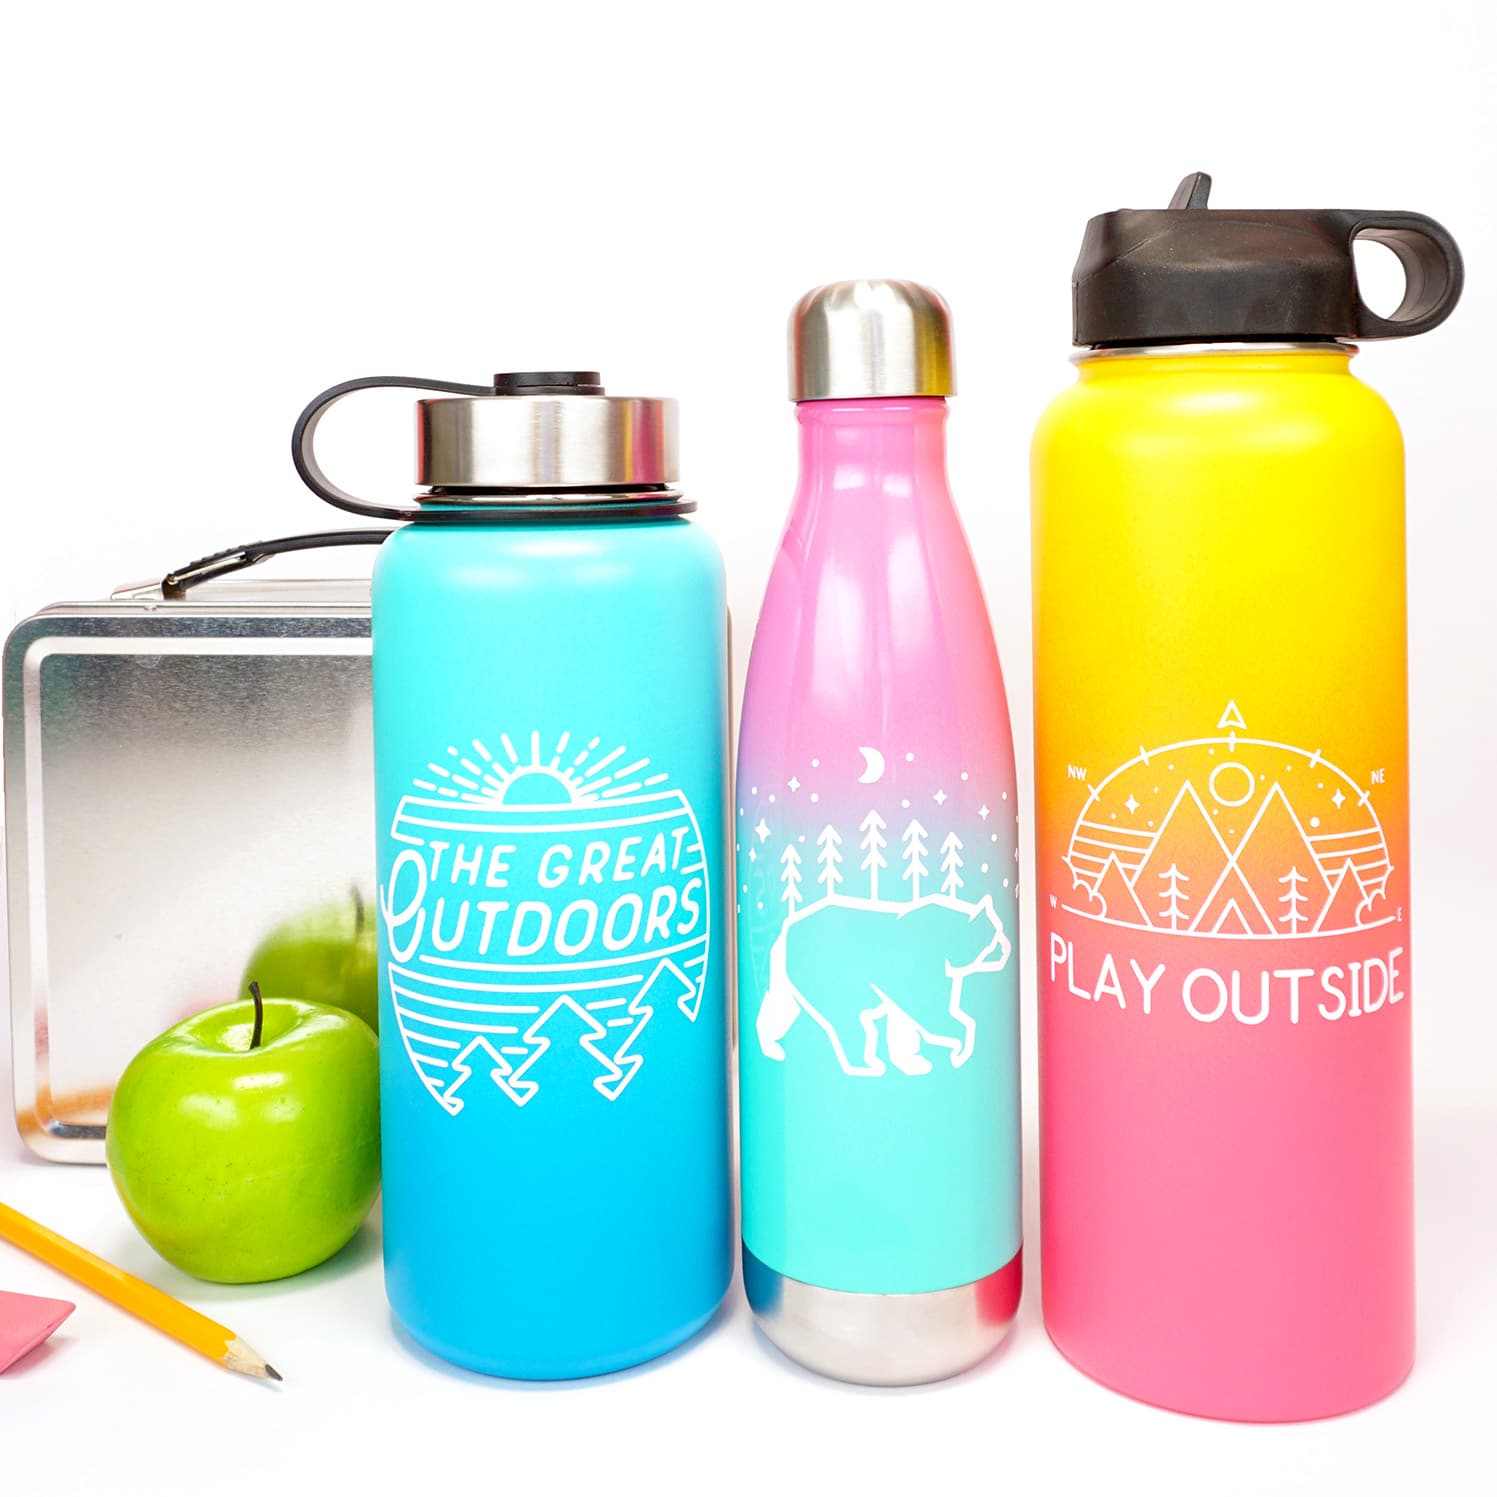 Soft Flasks. My quick guide to flask happiness. It's a thing.